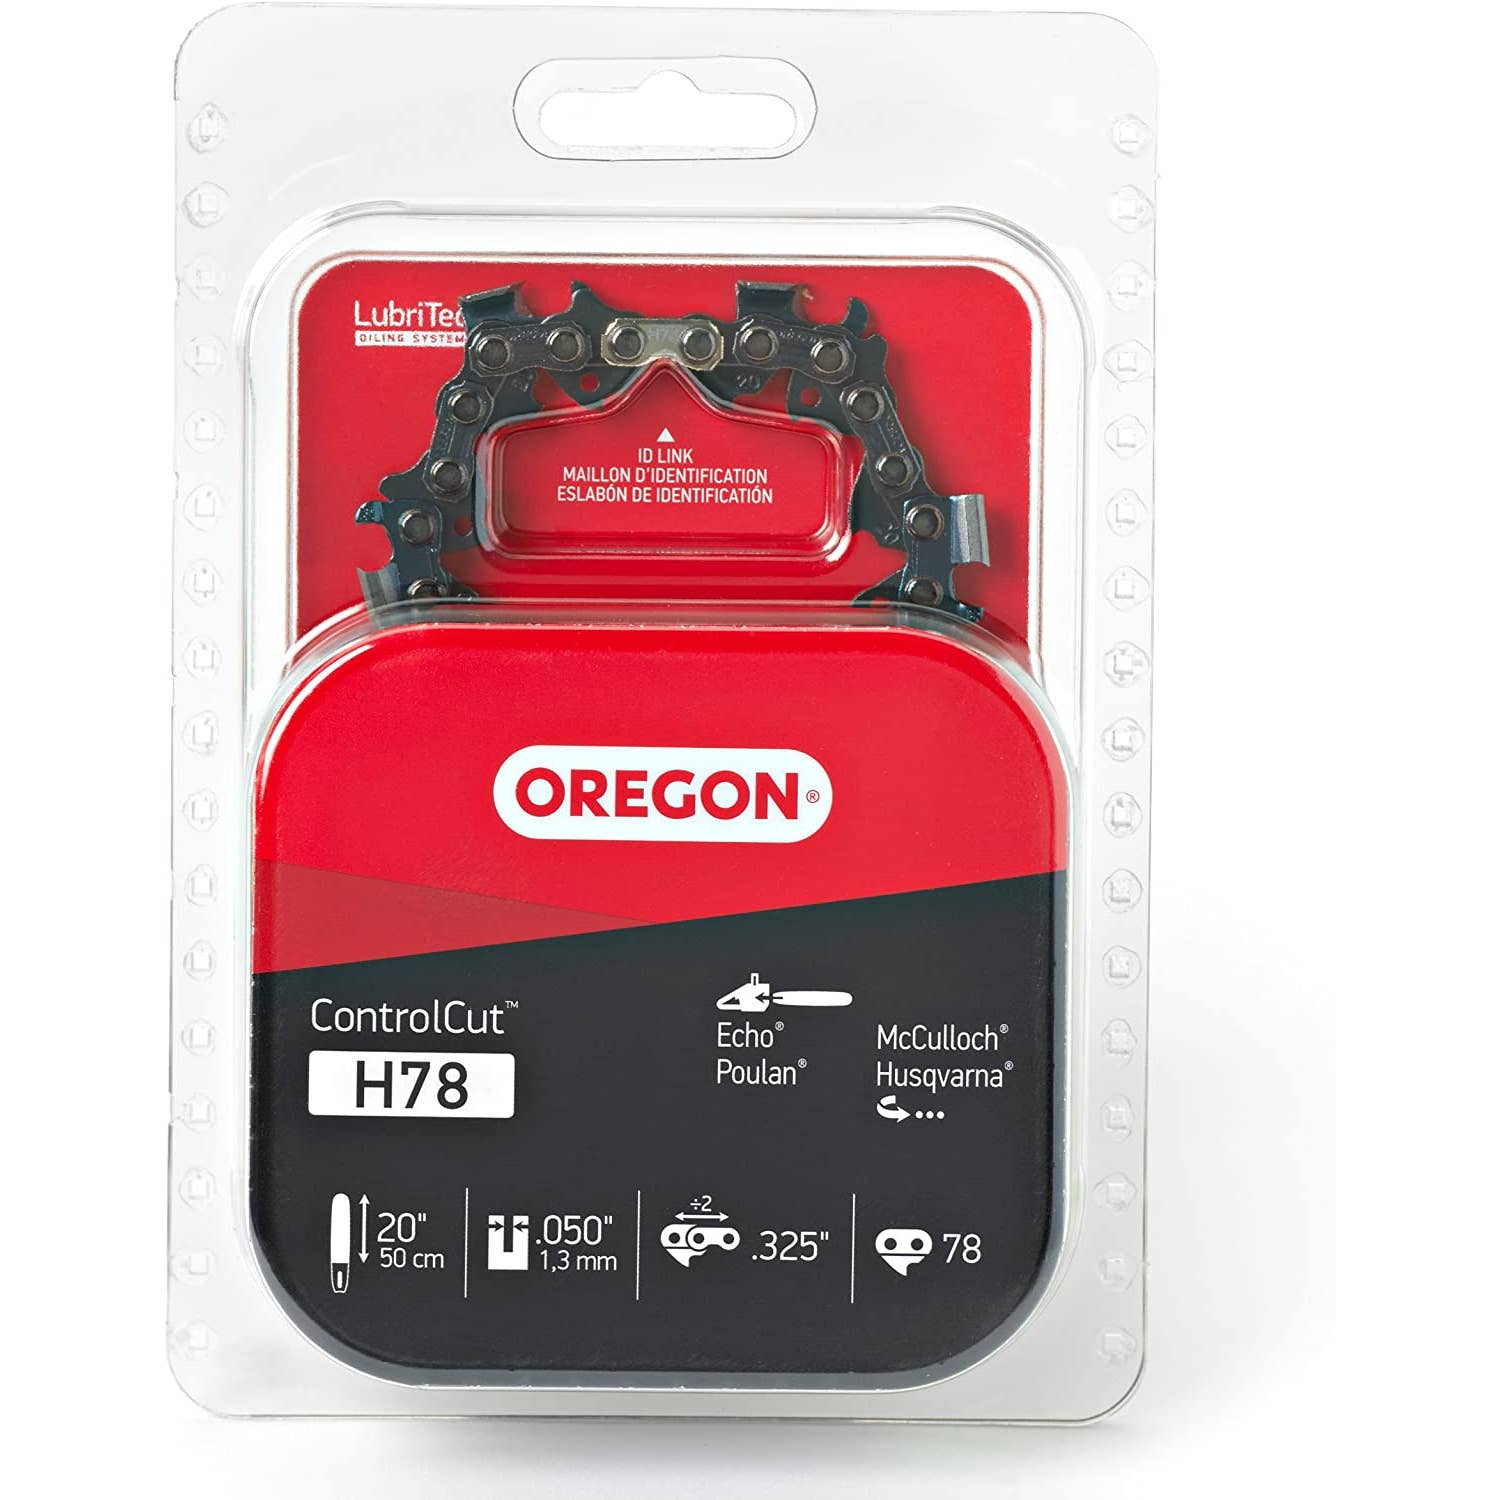 Oregon - H78 20-Inch ControlCut Chainsaw Chain - Fits Husqvarna, Jonsered and More